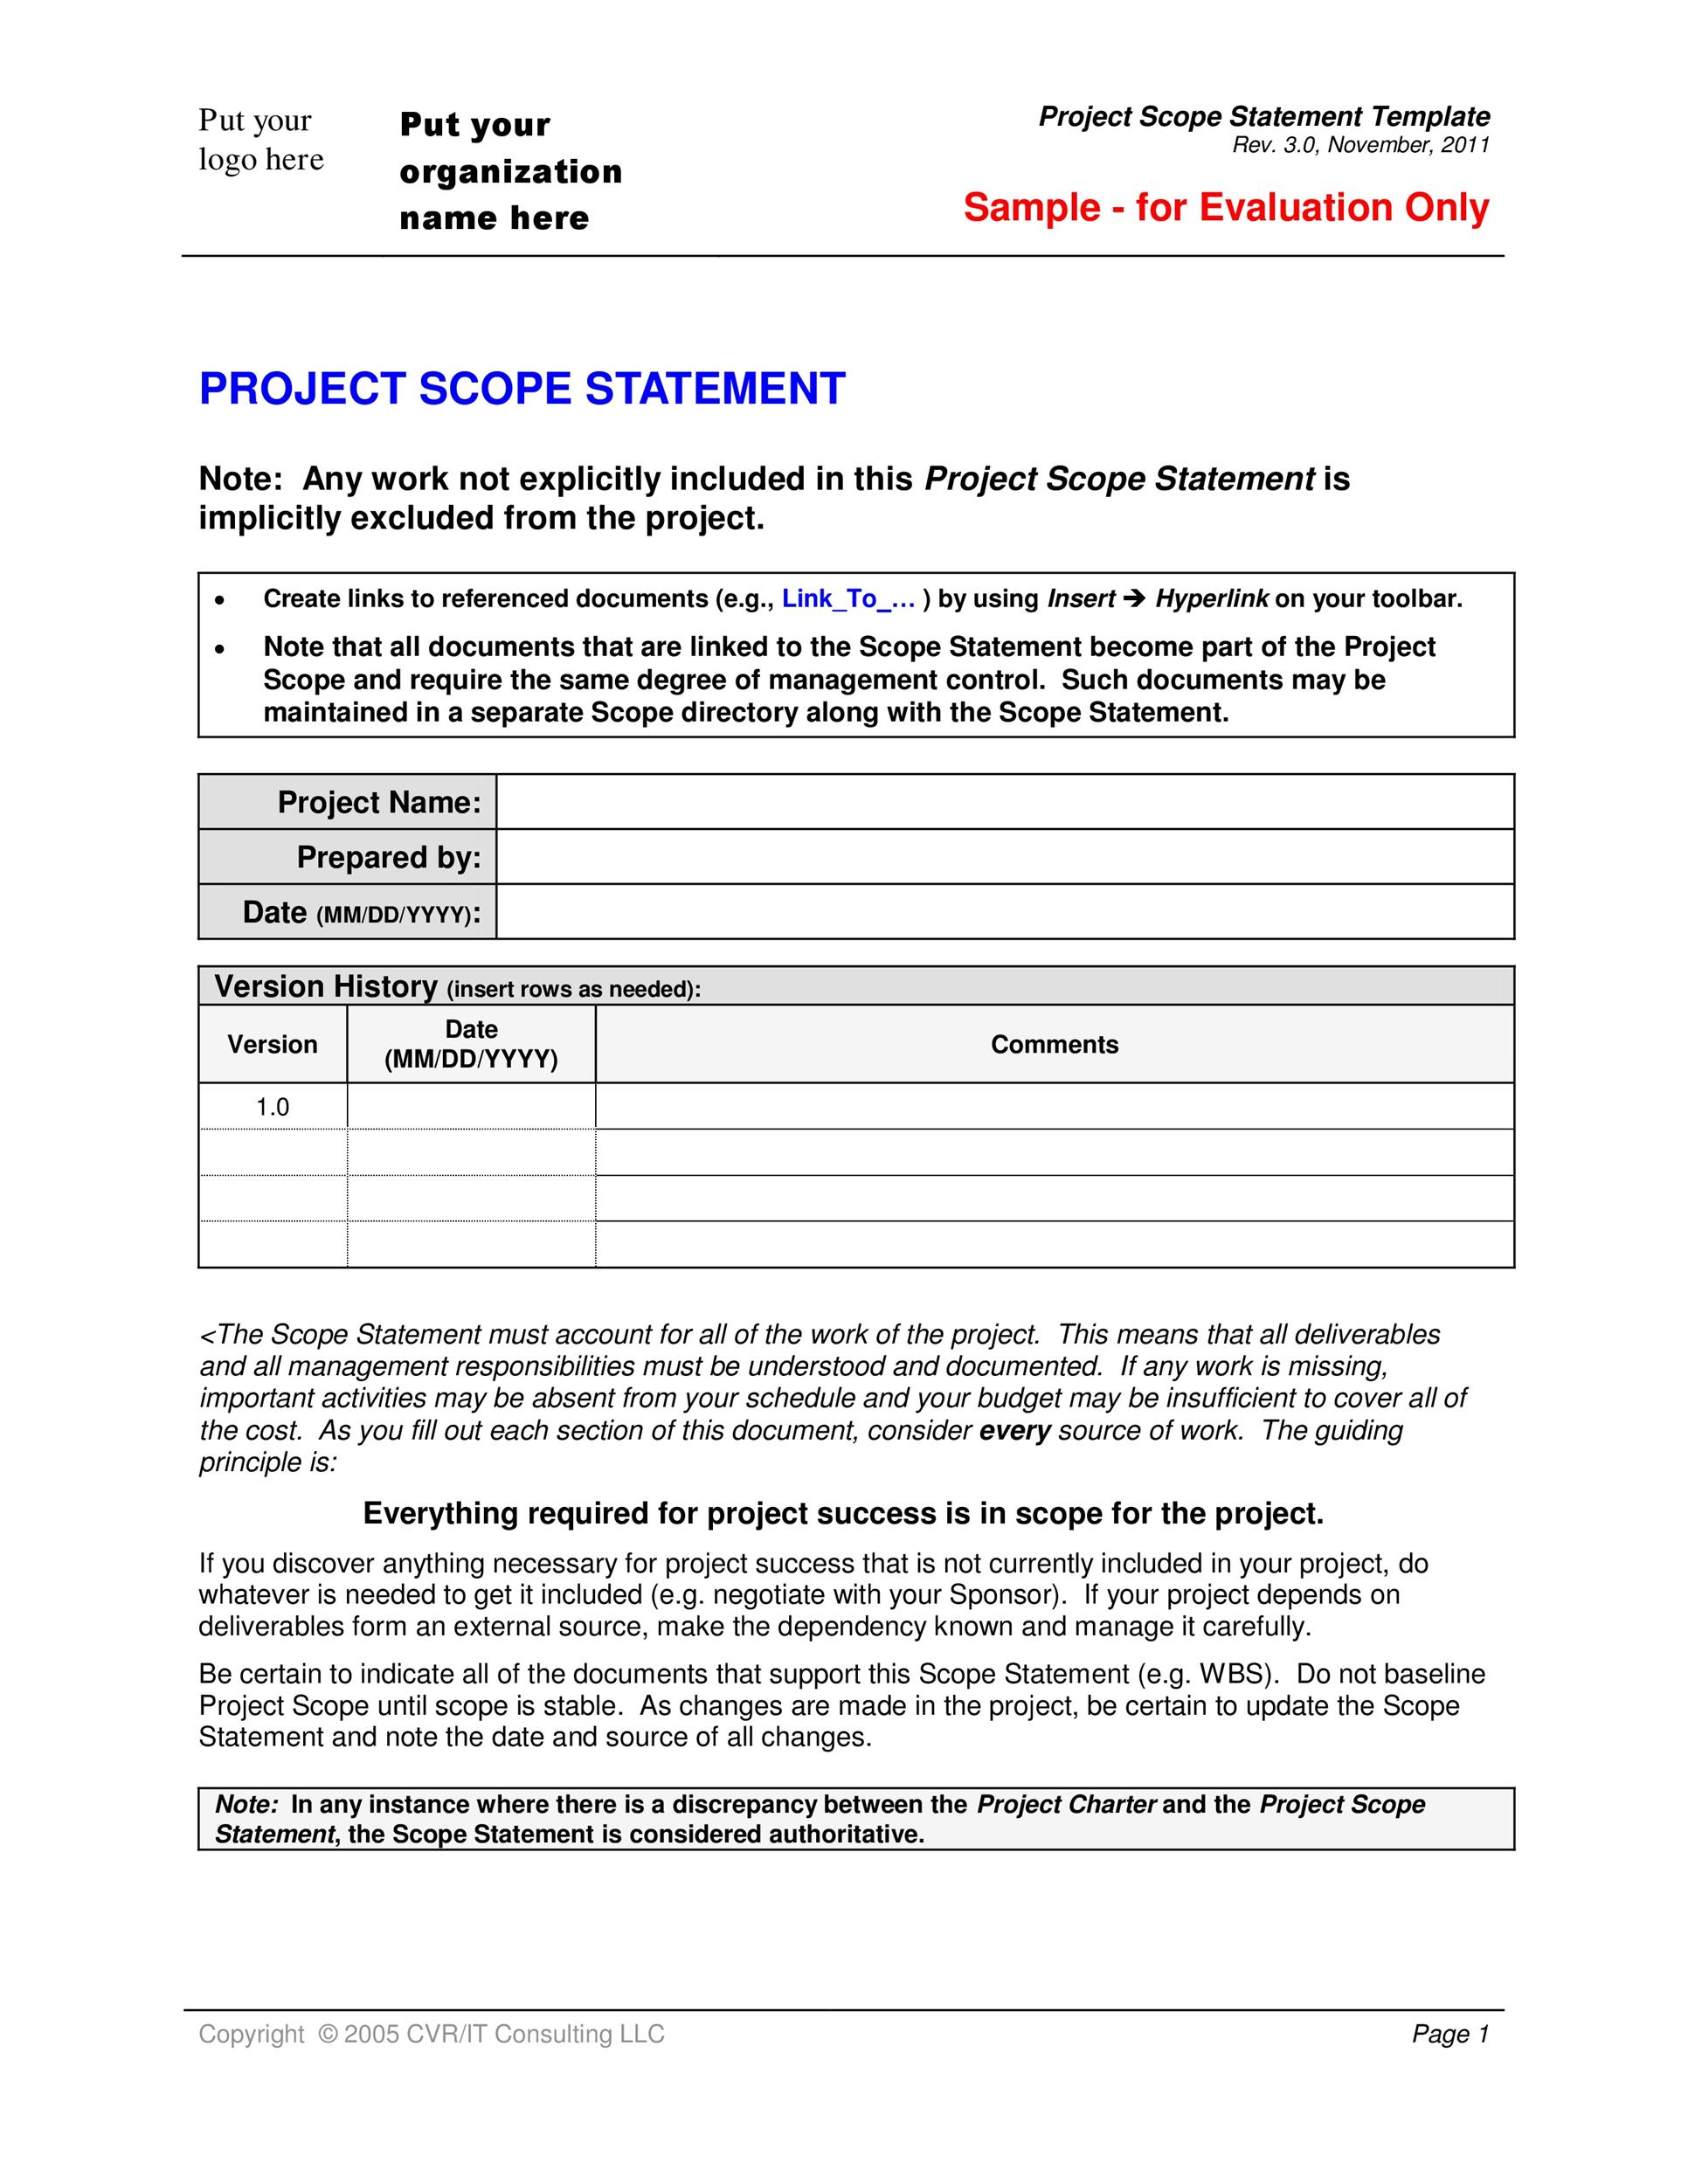 How to Write a Project Scope Statement